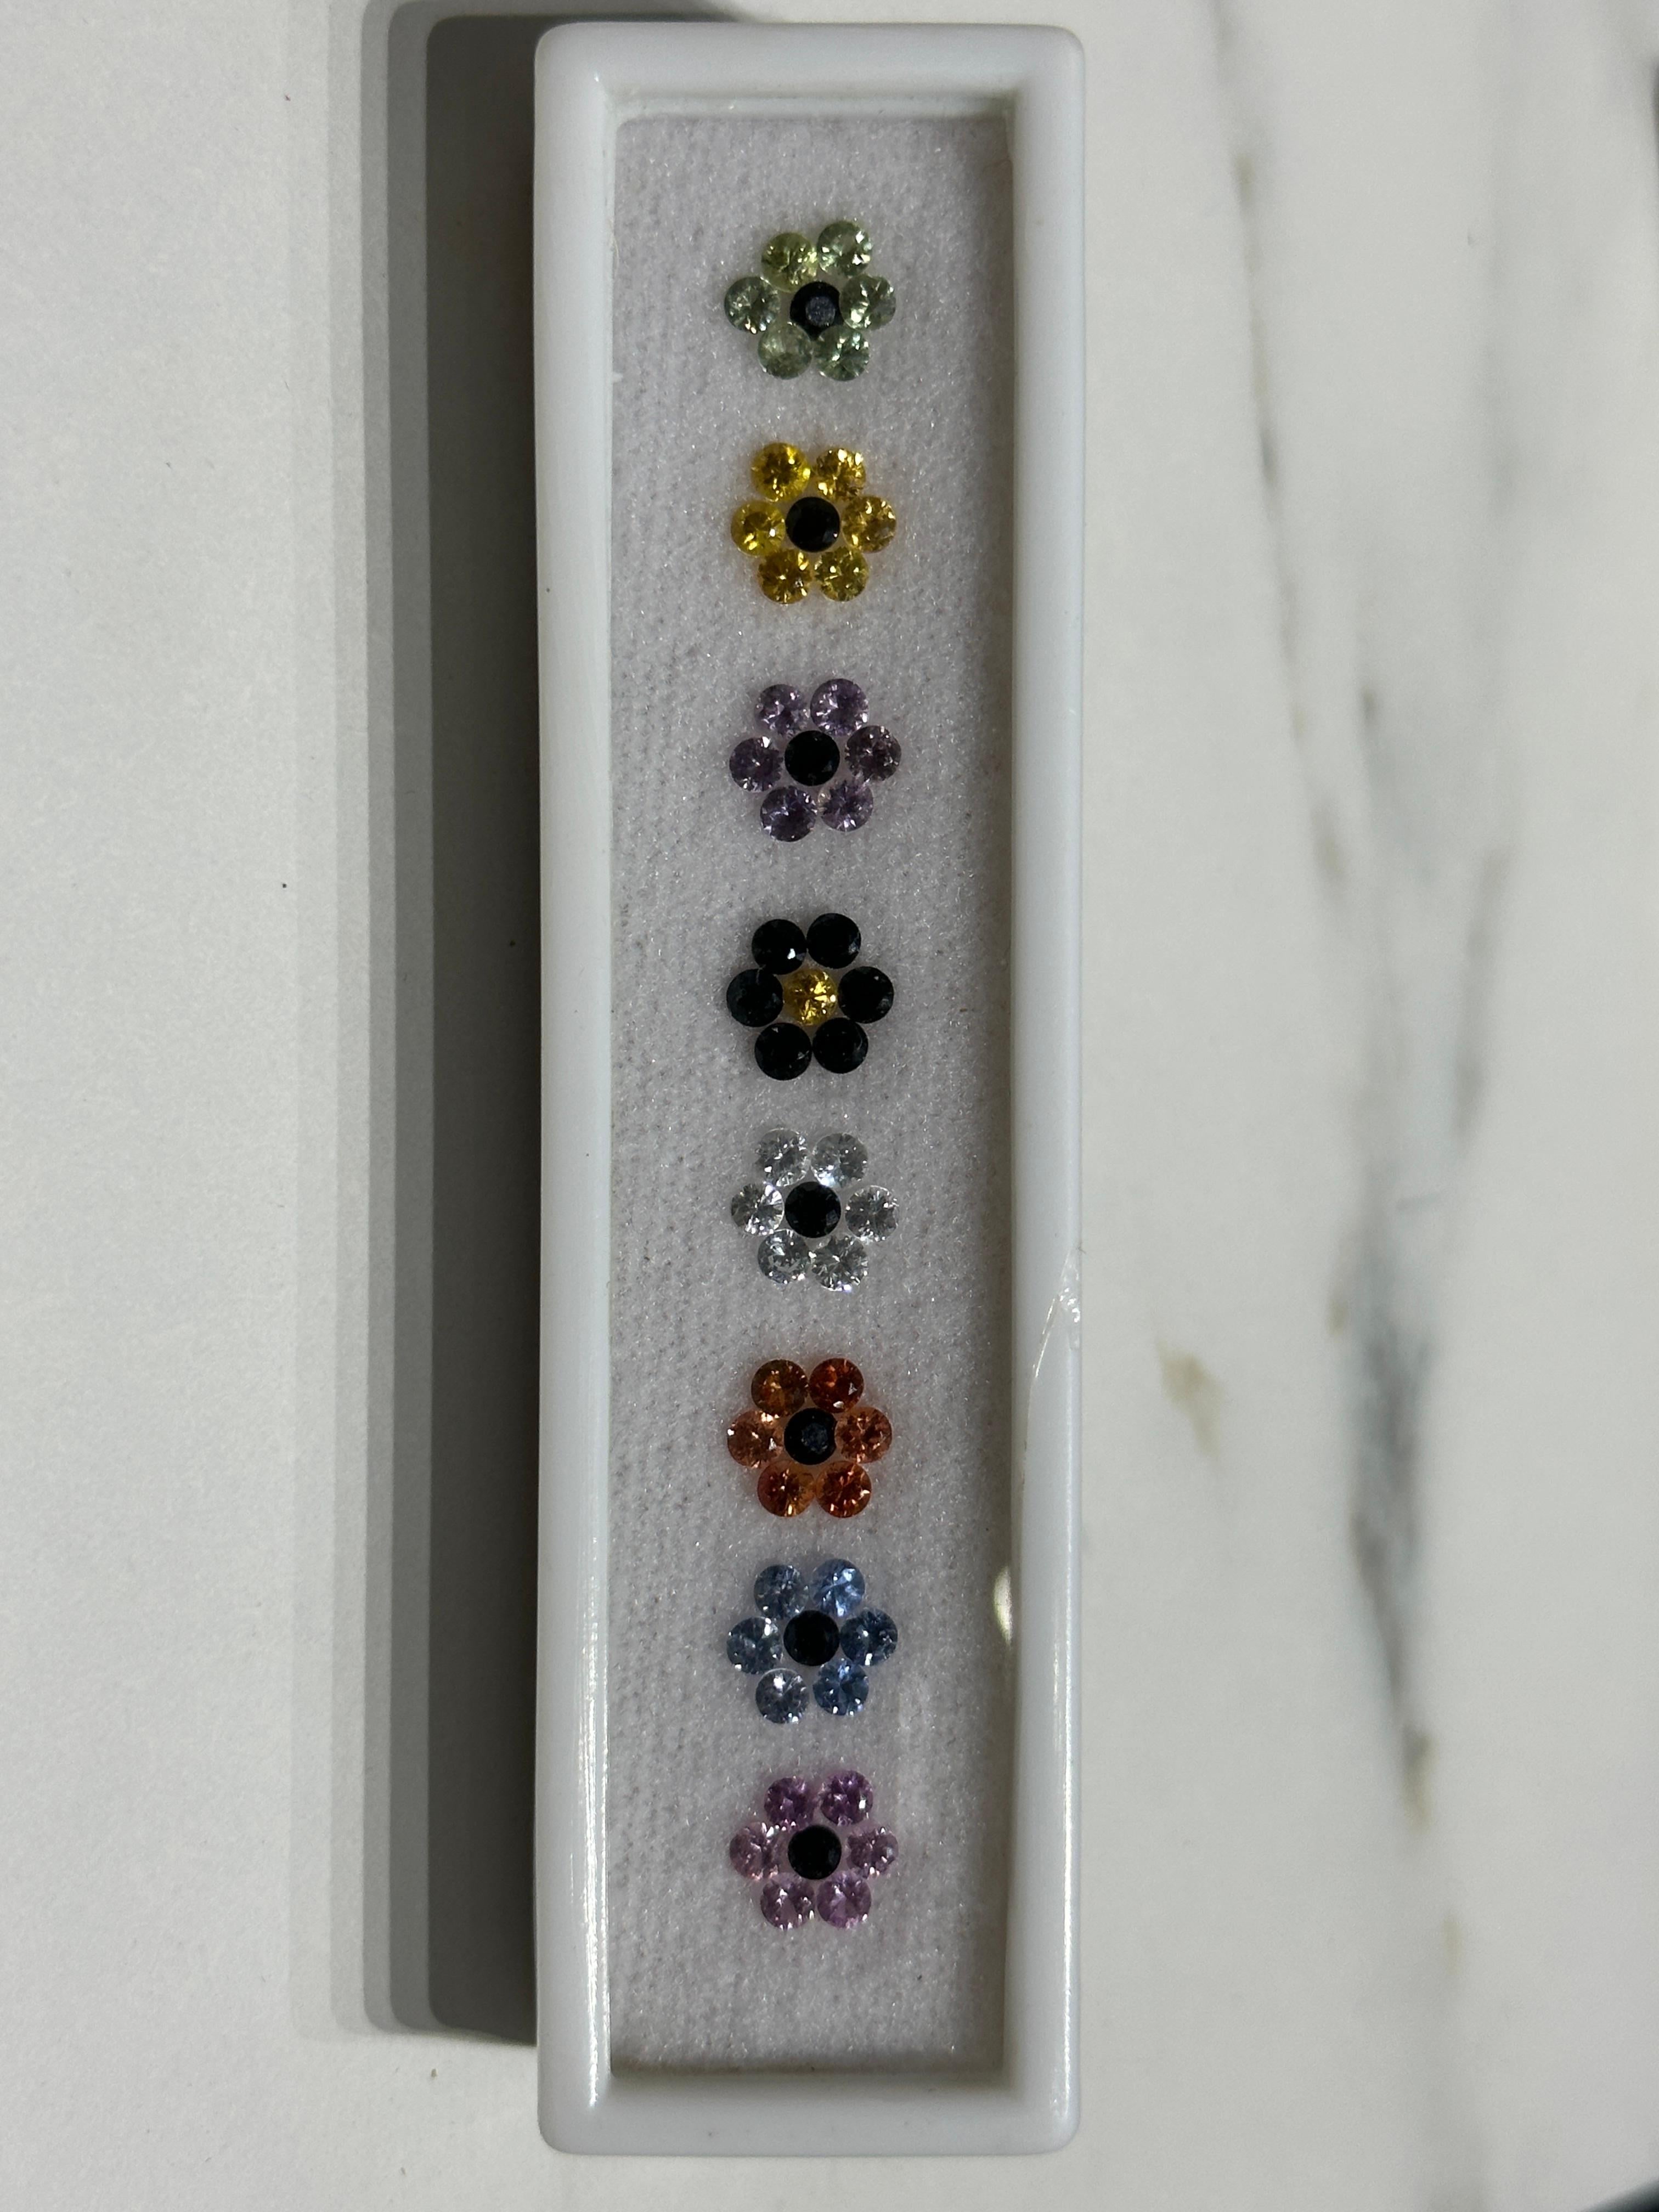 A wonderful lot of 56 2.7mm Natural Fancy Sapphires that lay in an orderly floral formation.
Though they are quite tiny, these diamond-cut sapphires are rich in color and show a full and lively brilliance.
The total weight of this lot amounts to